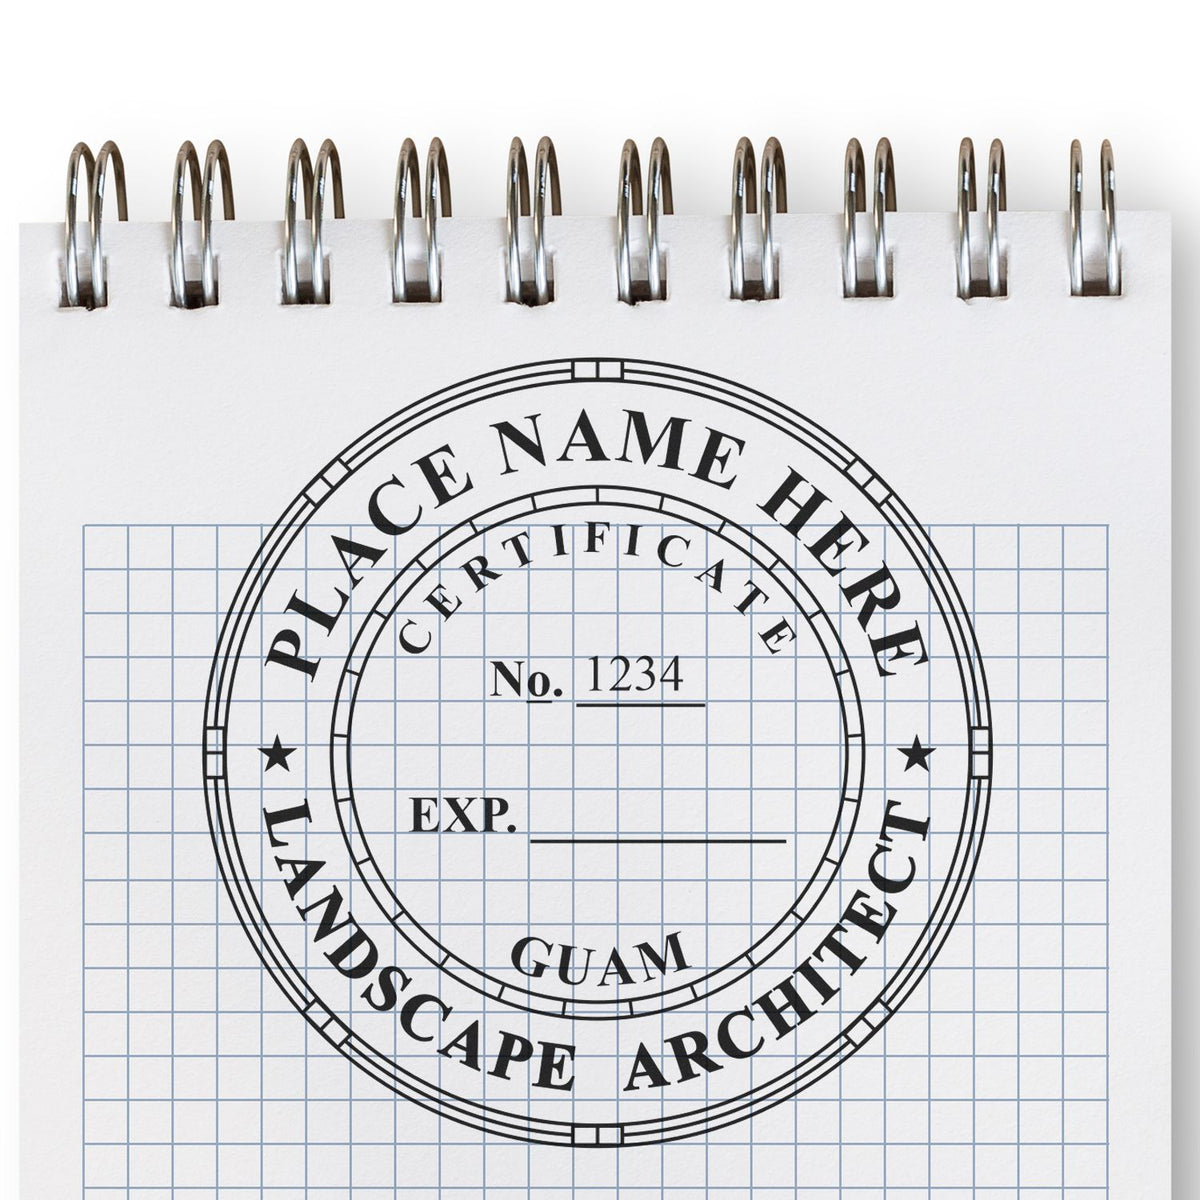 A stamped impression of the Digital Guam Landscape Architect Stamp in this stylish lifestyle photo, setting the tone for a unique and personalized product.